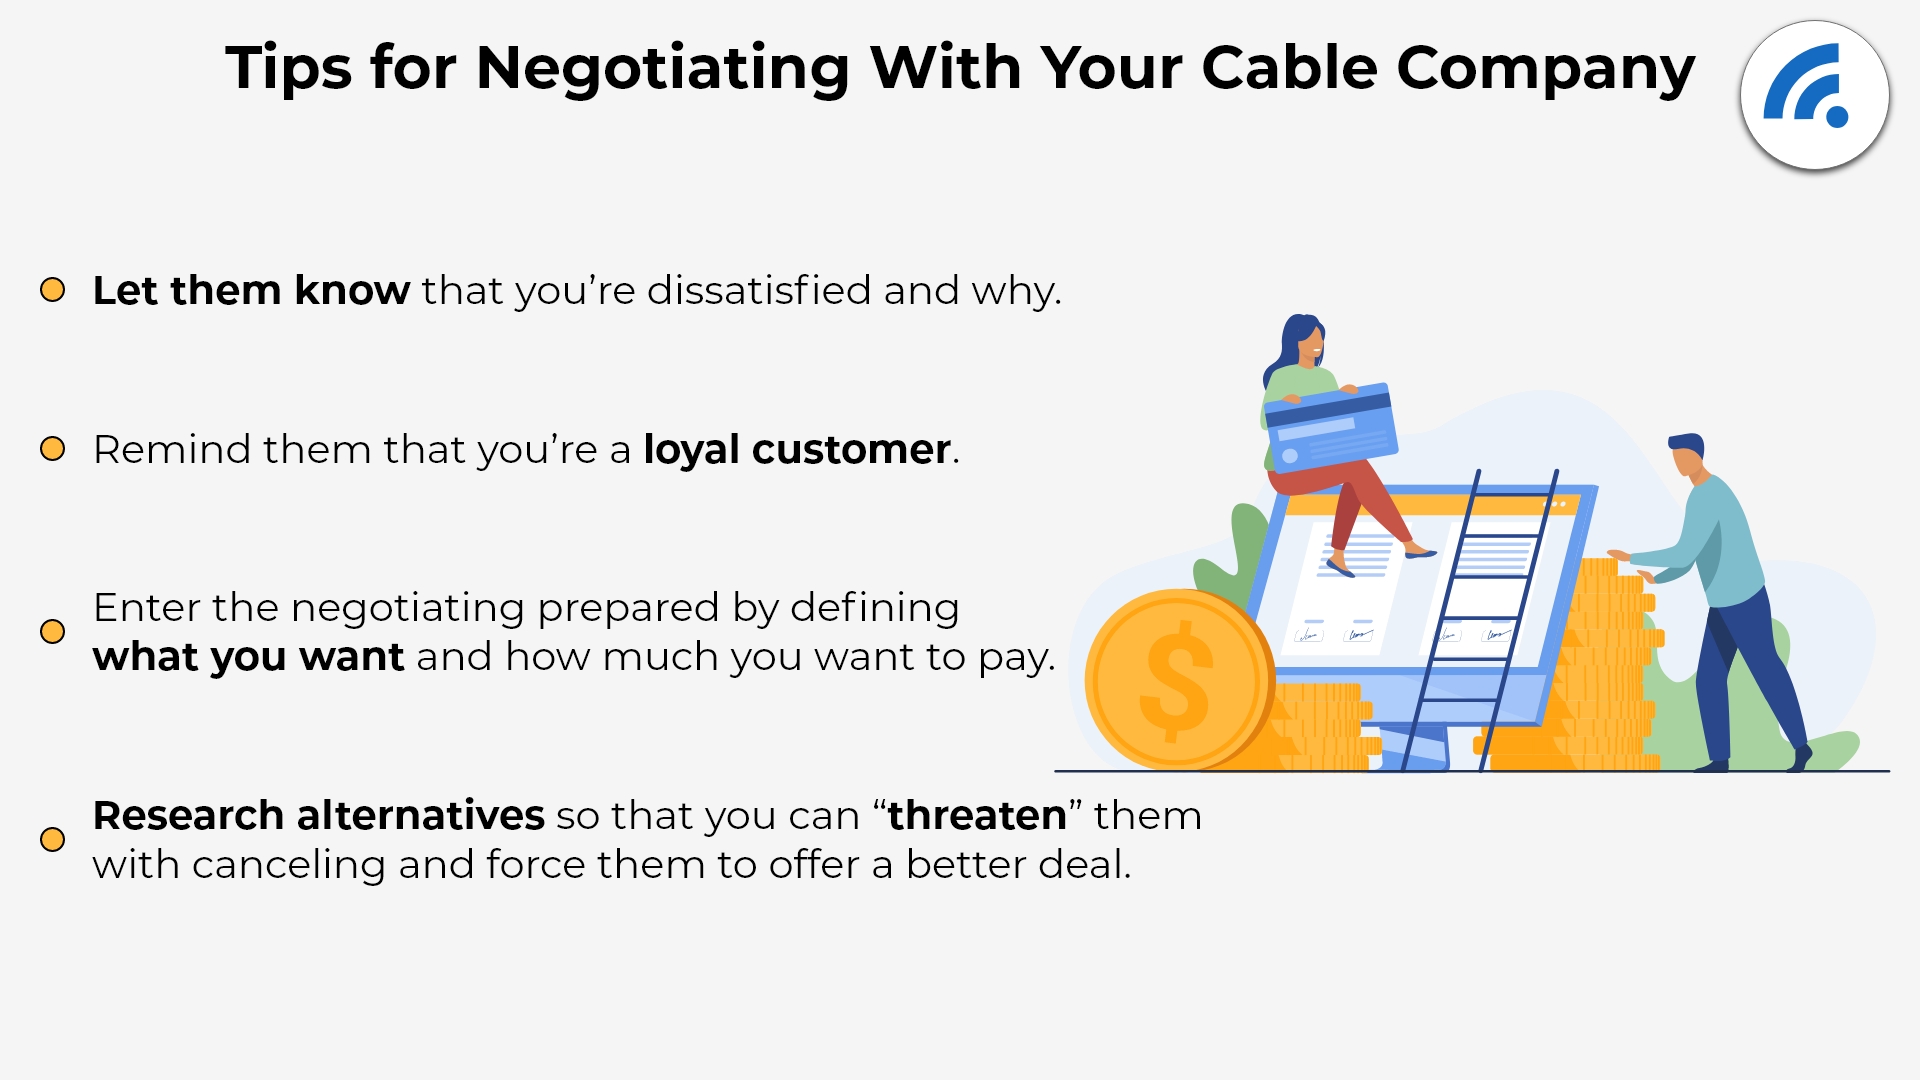 How To Negotiate With Your Cable Company